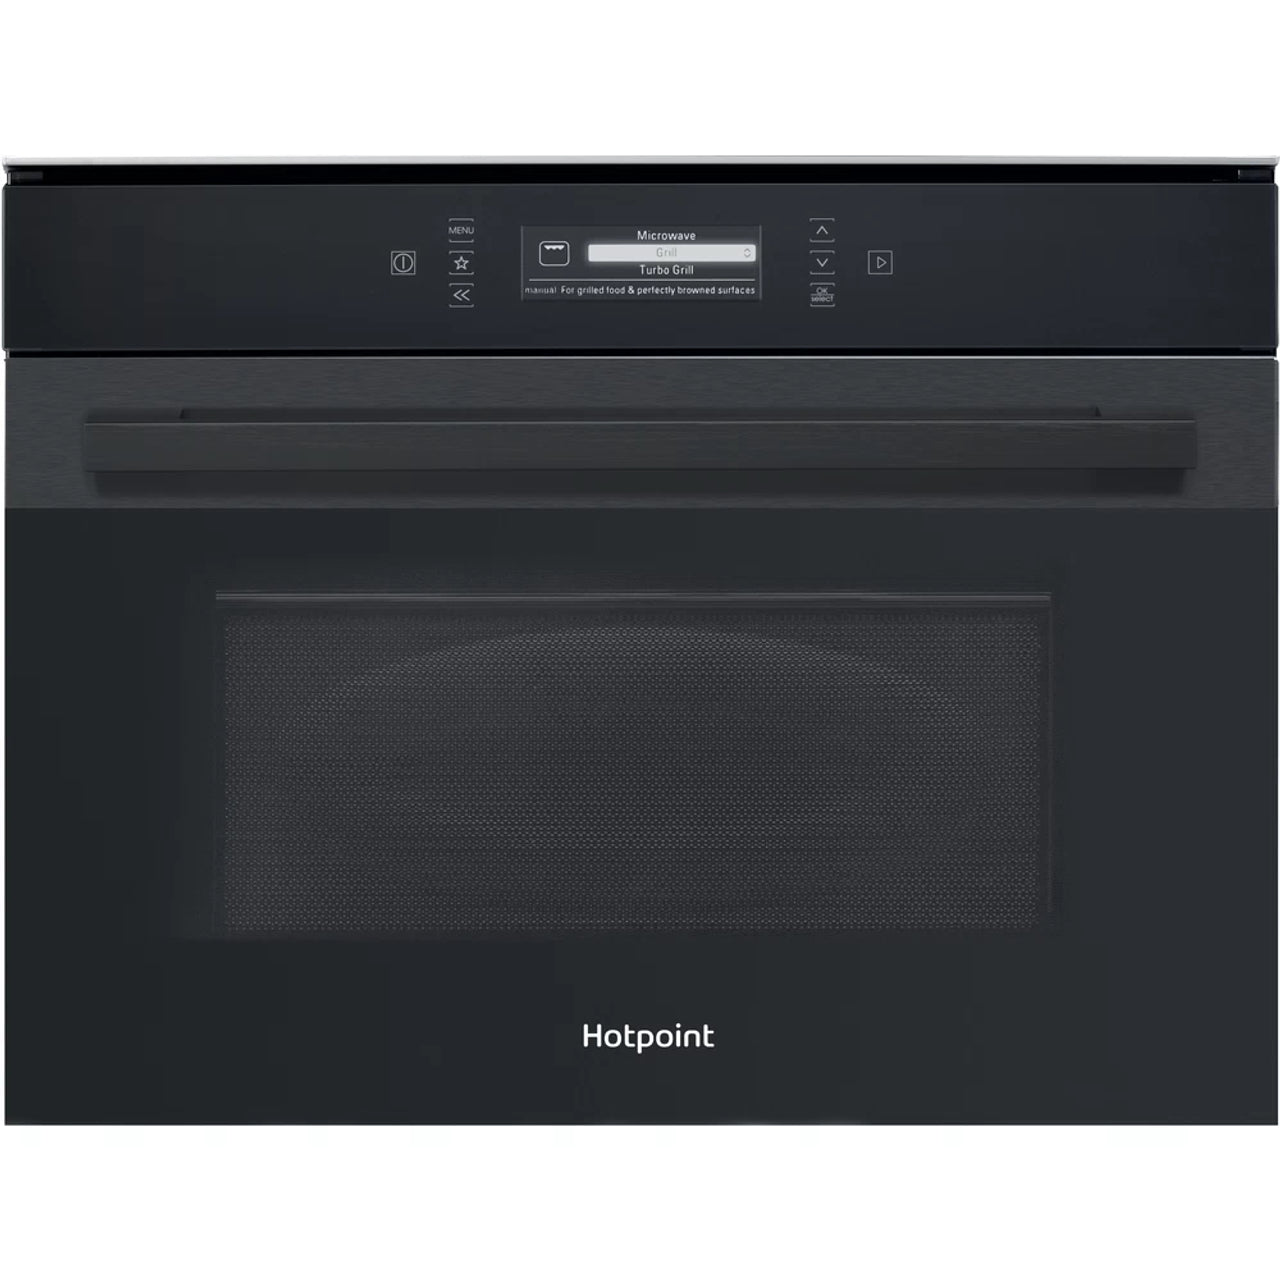 Hotpoint, Built-in Microwave Oven Black Steel | MP996BMH